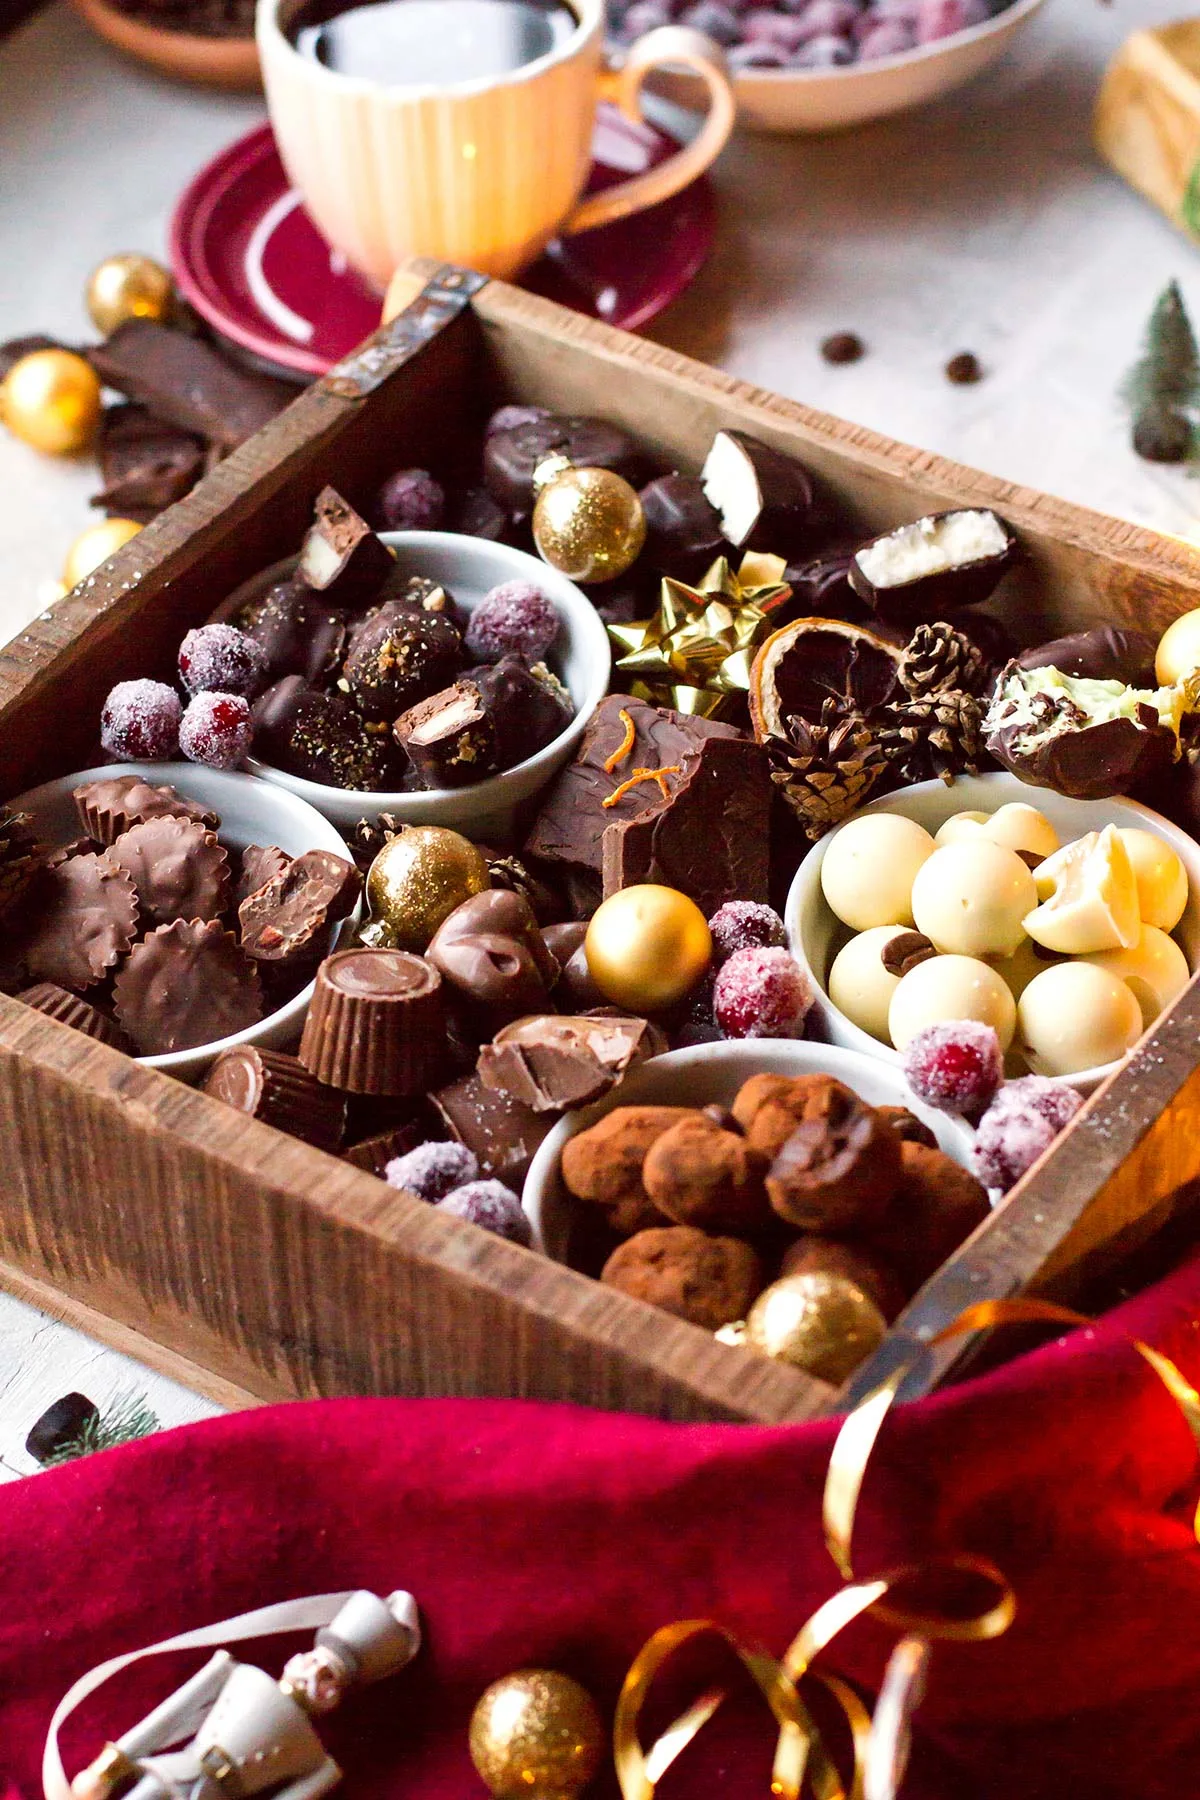 A vintage wooden crate filled with various chocolates.